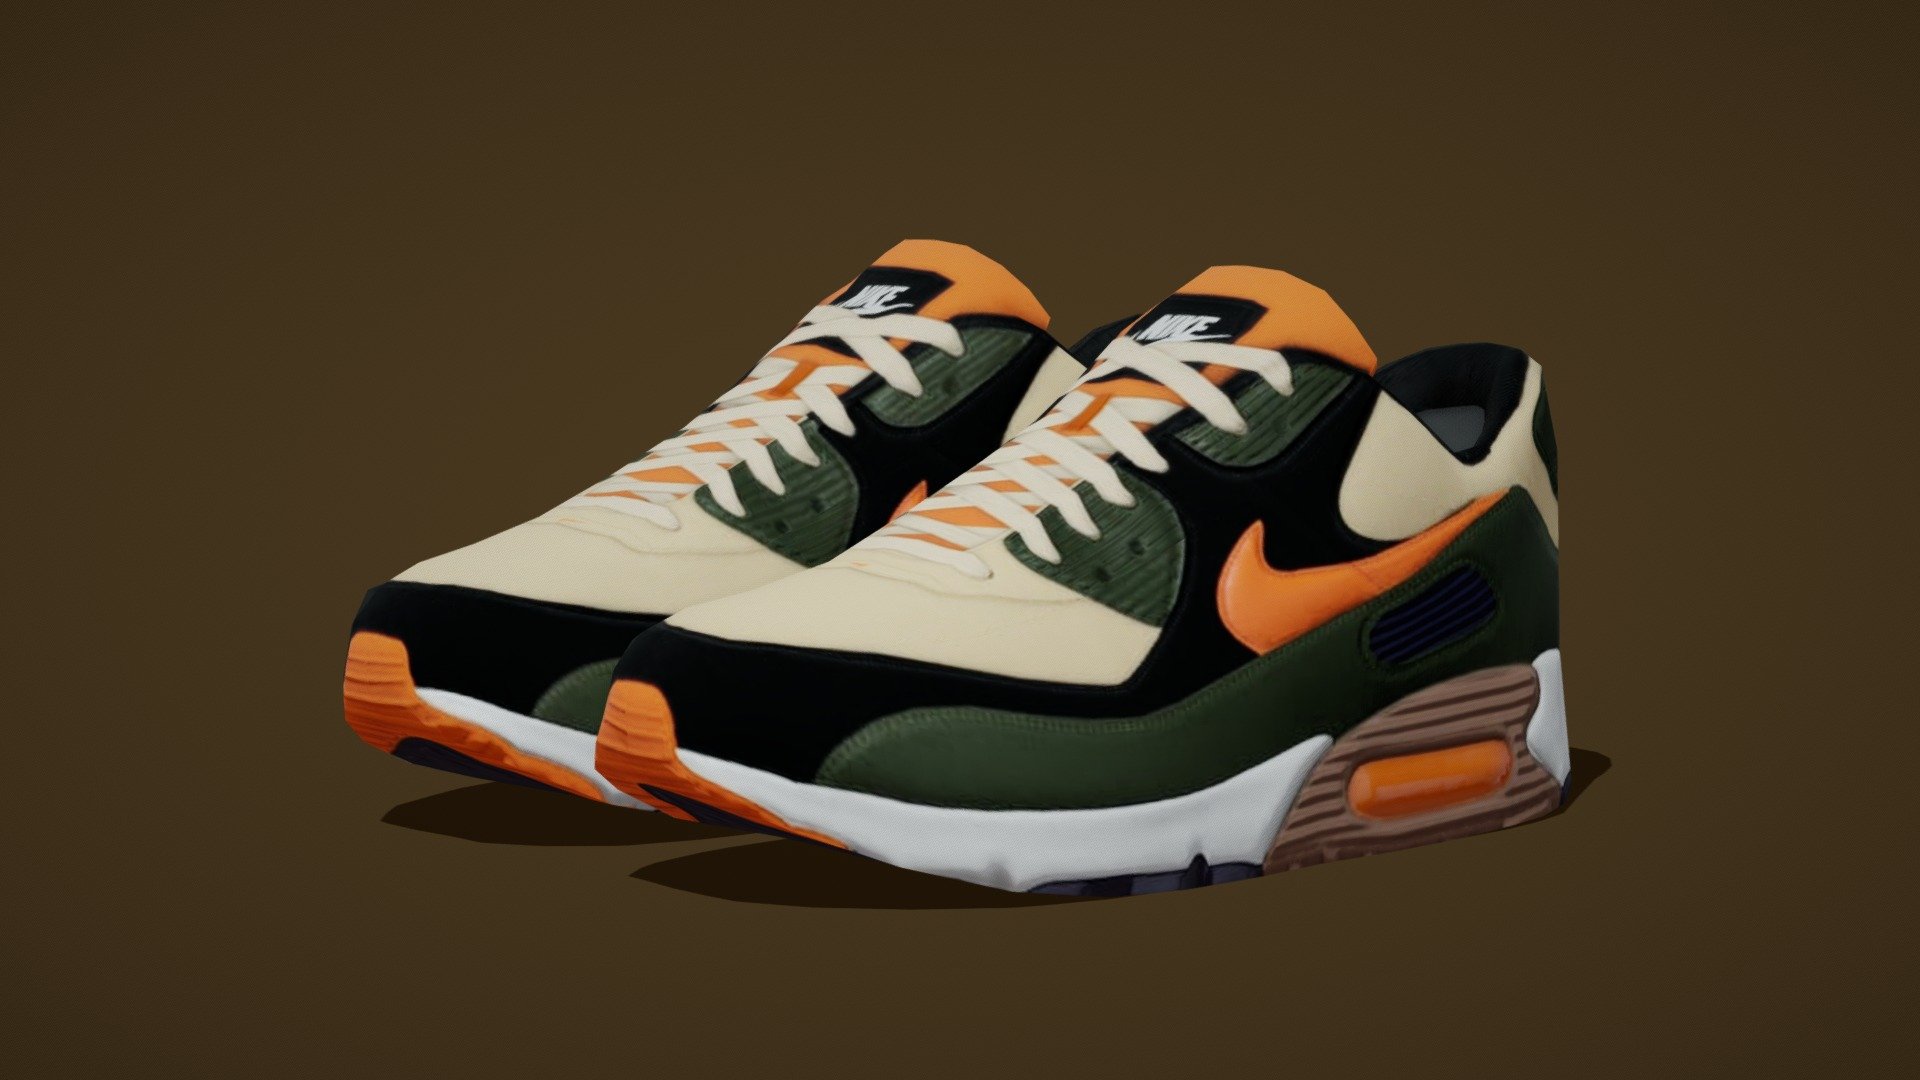 Airmax NIKE Shoes model in very low poly style.

GLB File size under 400 kb

Model : Poly Count - 1328 Tris.

Texture : 1k resolution.

Best suitable for Metaverse projects.

Pack of 10 : https://skfb.ly/oQuKA

Highpoly Model : https://skfb.ly/oxPCR - Airmax - Nike Shoes 06 - Very Low Poly - Buy Royalty Free 3D model by 5th Dimension (@5th-Dimension) 3d model